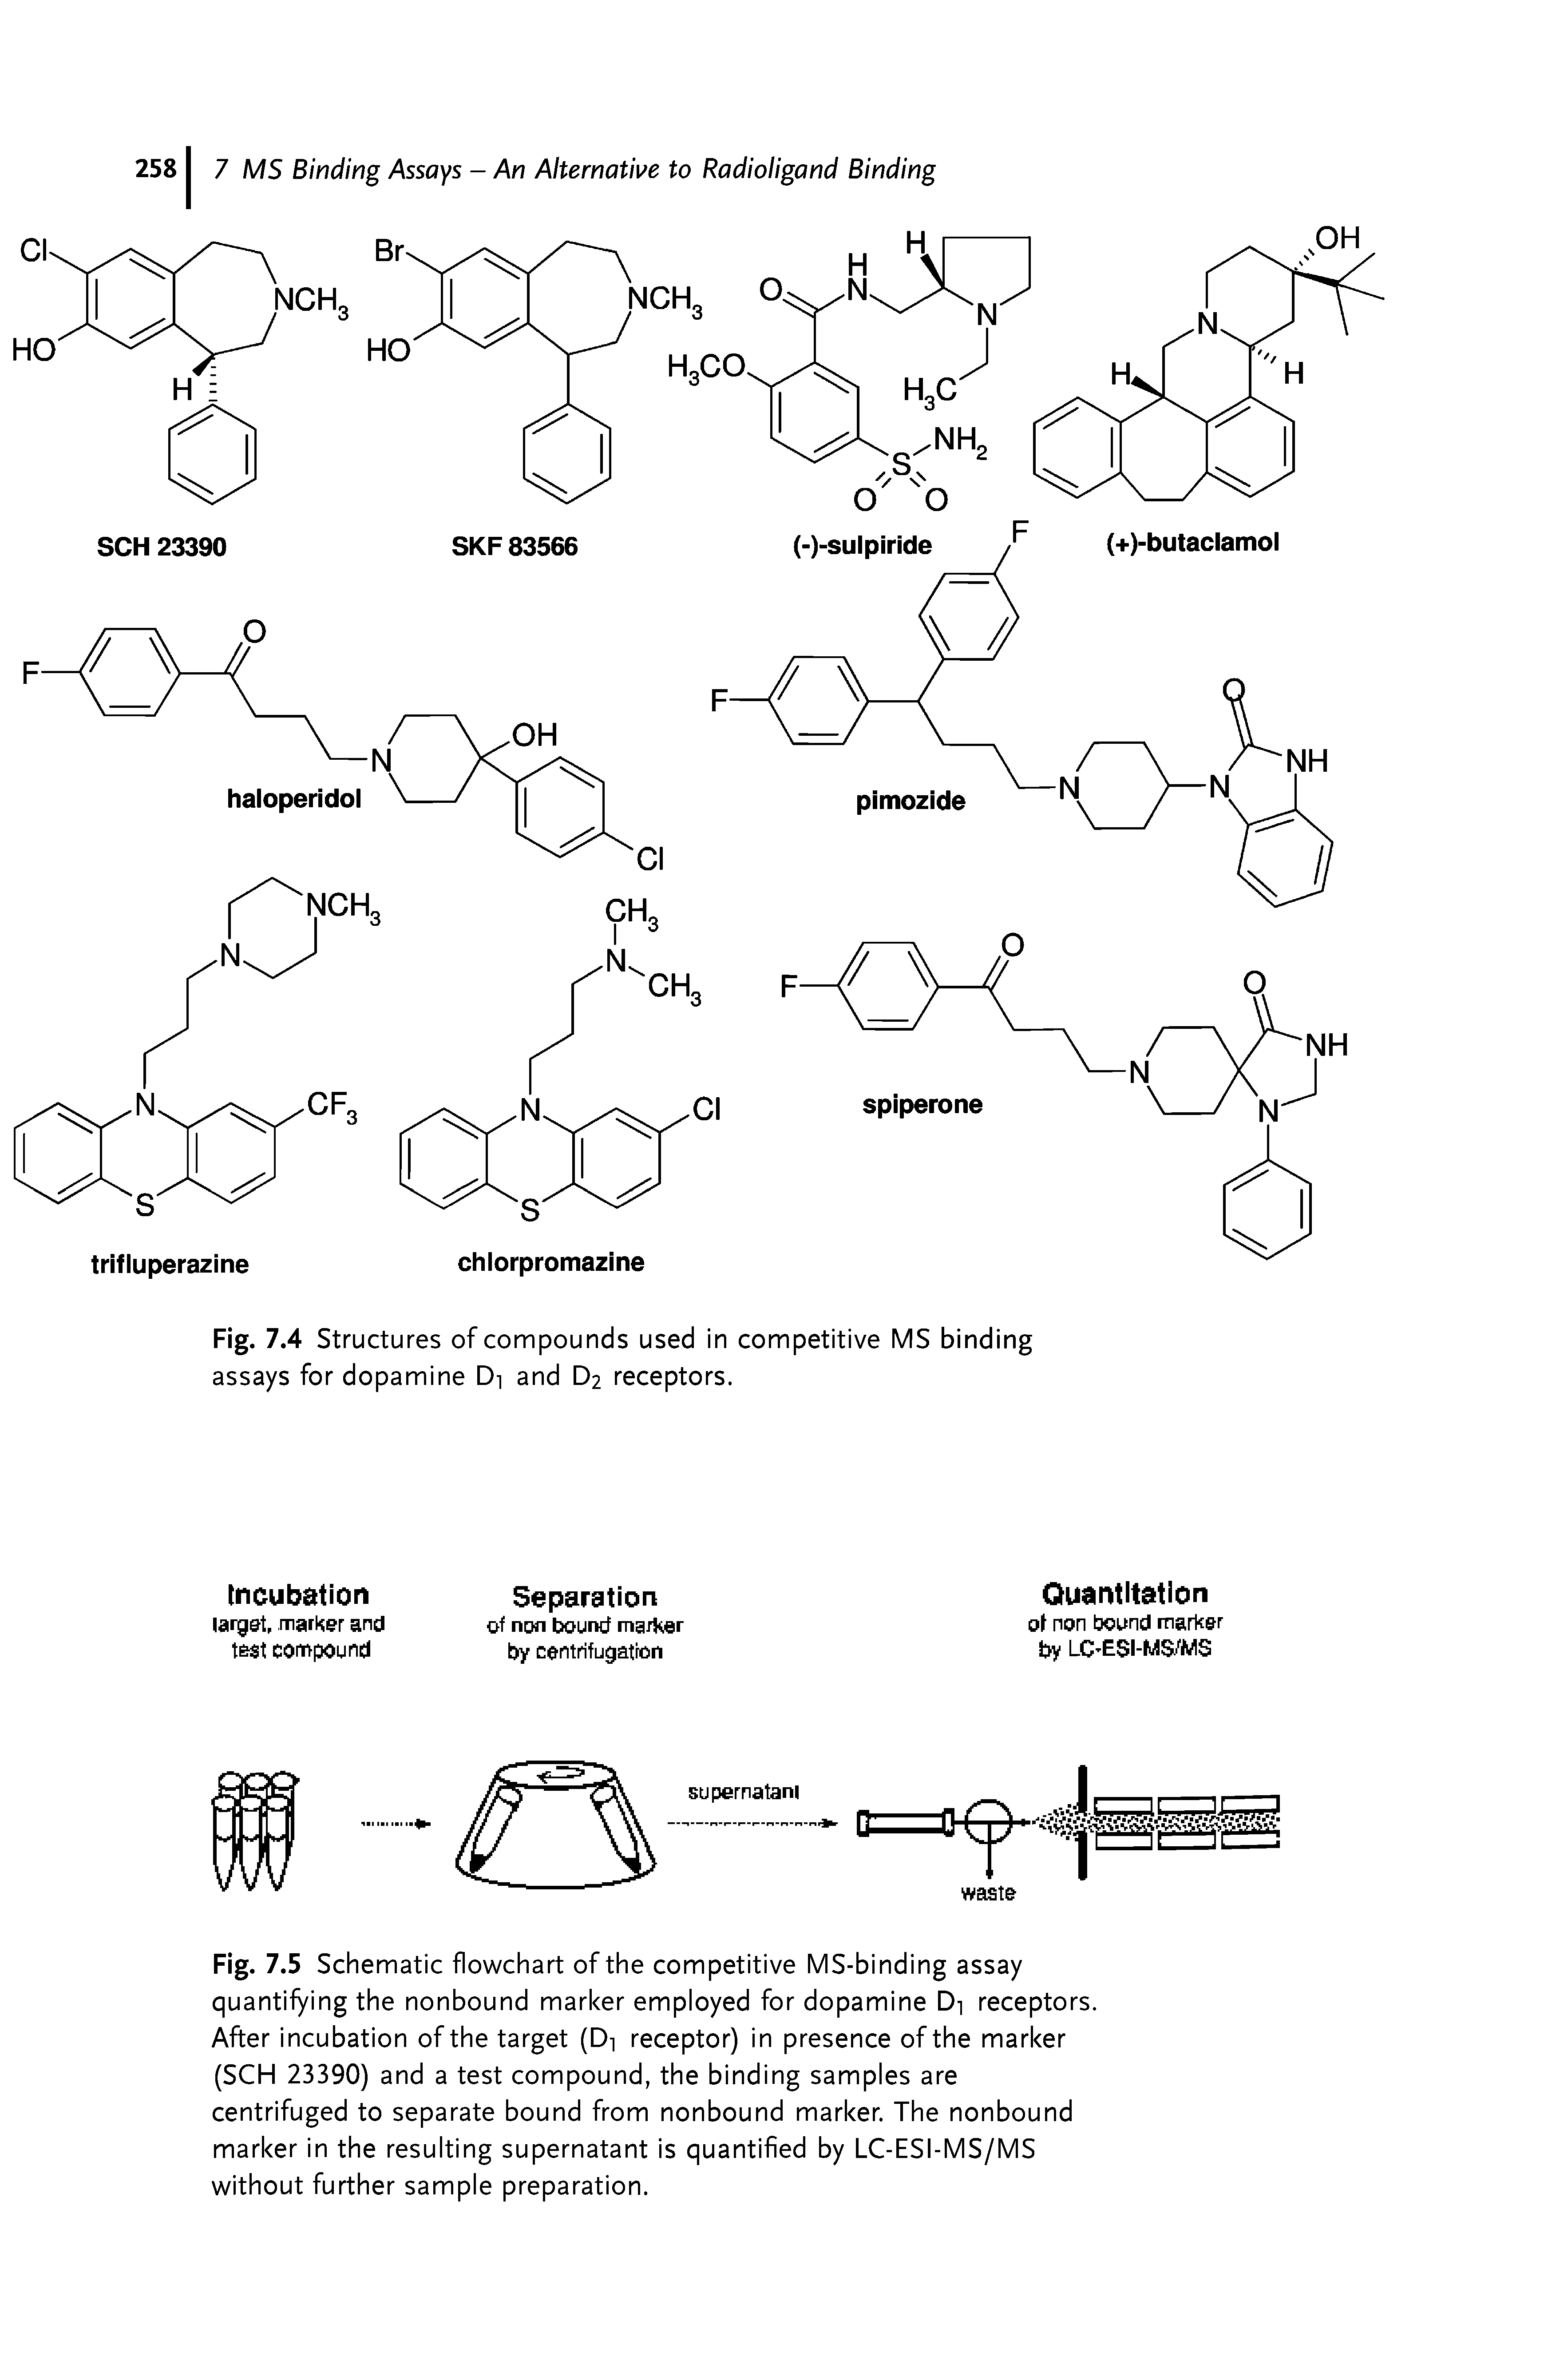 Fig. 7.5 Schematic flowchart of the competitive MS-binding assay quantifying the nonbound marker employed for dopamine Di receptors. After incubation of the target (Di receptor) in presence of the marker (SCH 23390) and a test compound, the binding samples are centrifuged to separate bound from nonbound marker. The nonbound marker in the resulting supernatant is quantified by LC-ESI-MS/MS without further sample preparation.